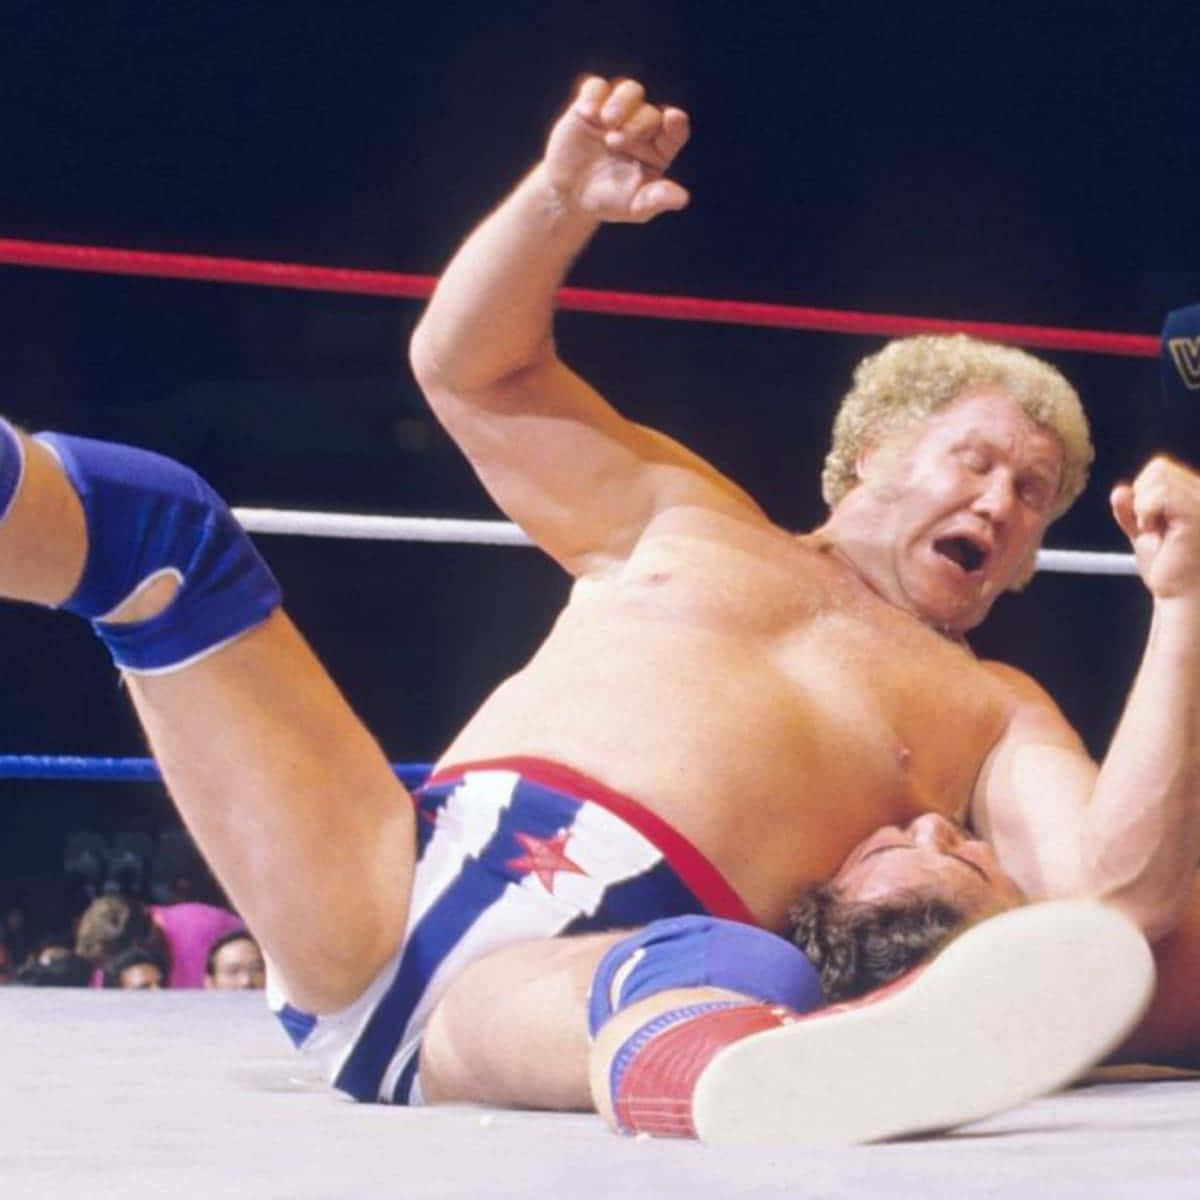 Harley Race Falls Down And Tackles Opponent Wallpaper